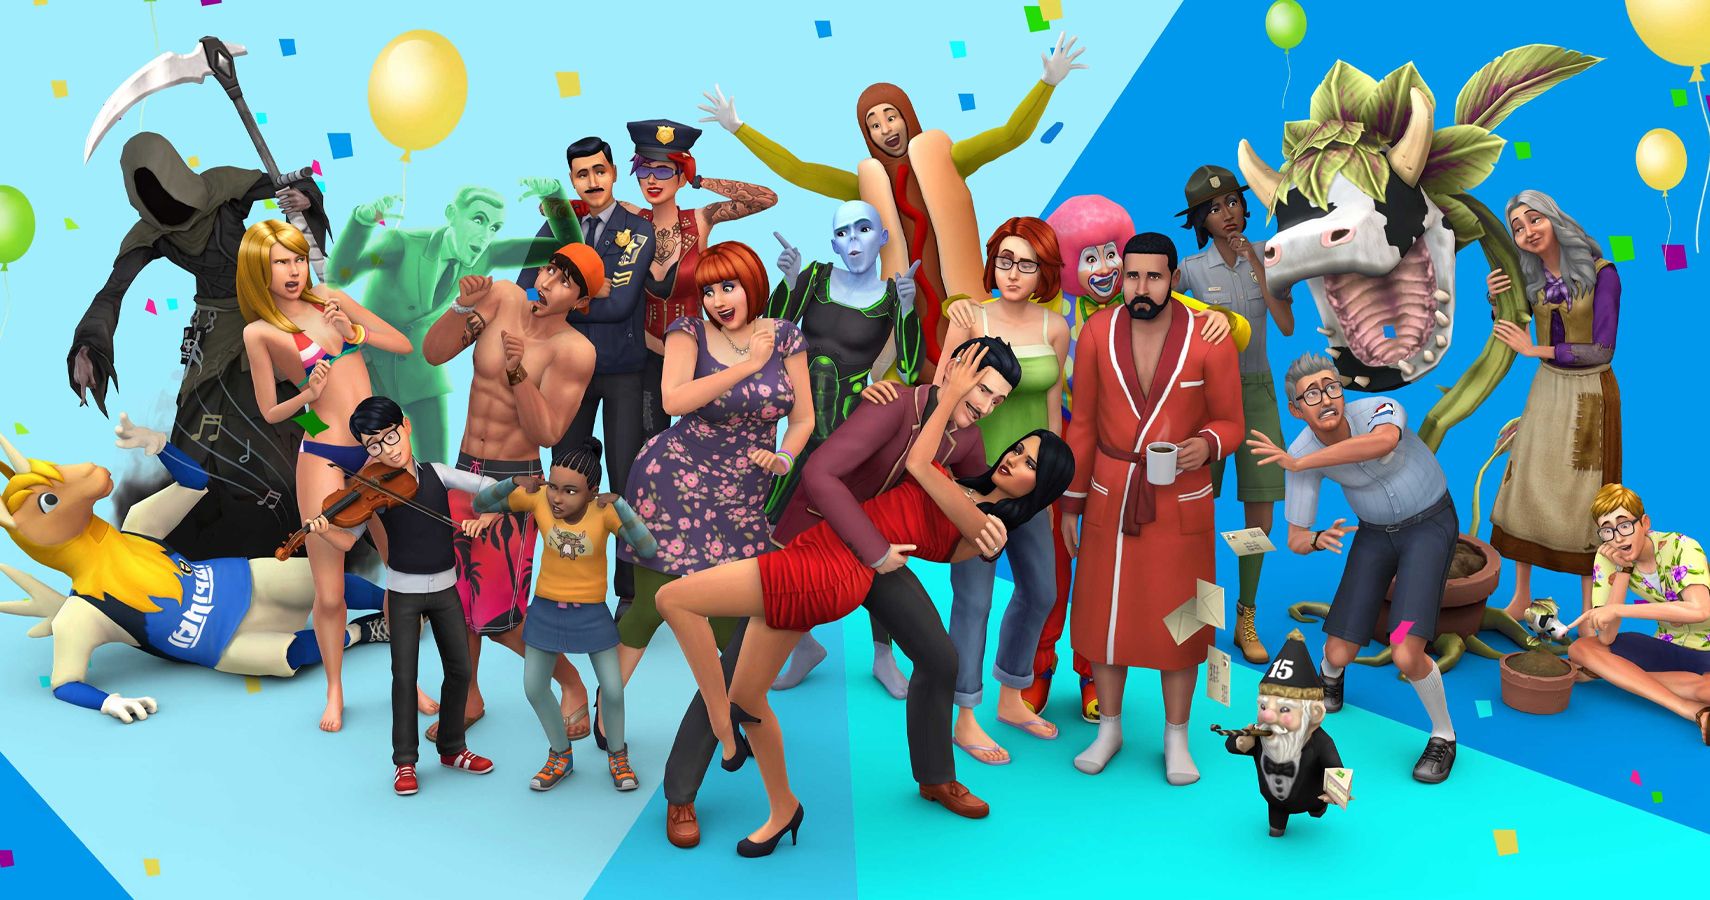 The Sims 4: Guides For DLC Content | TheGamer